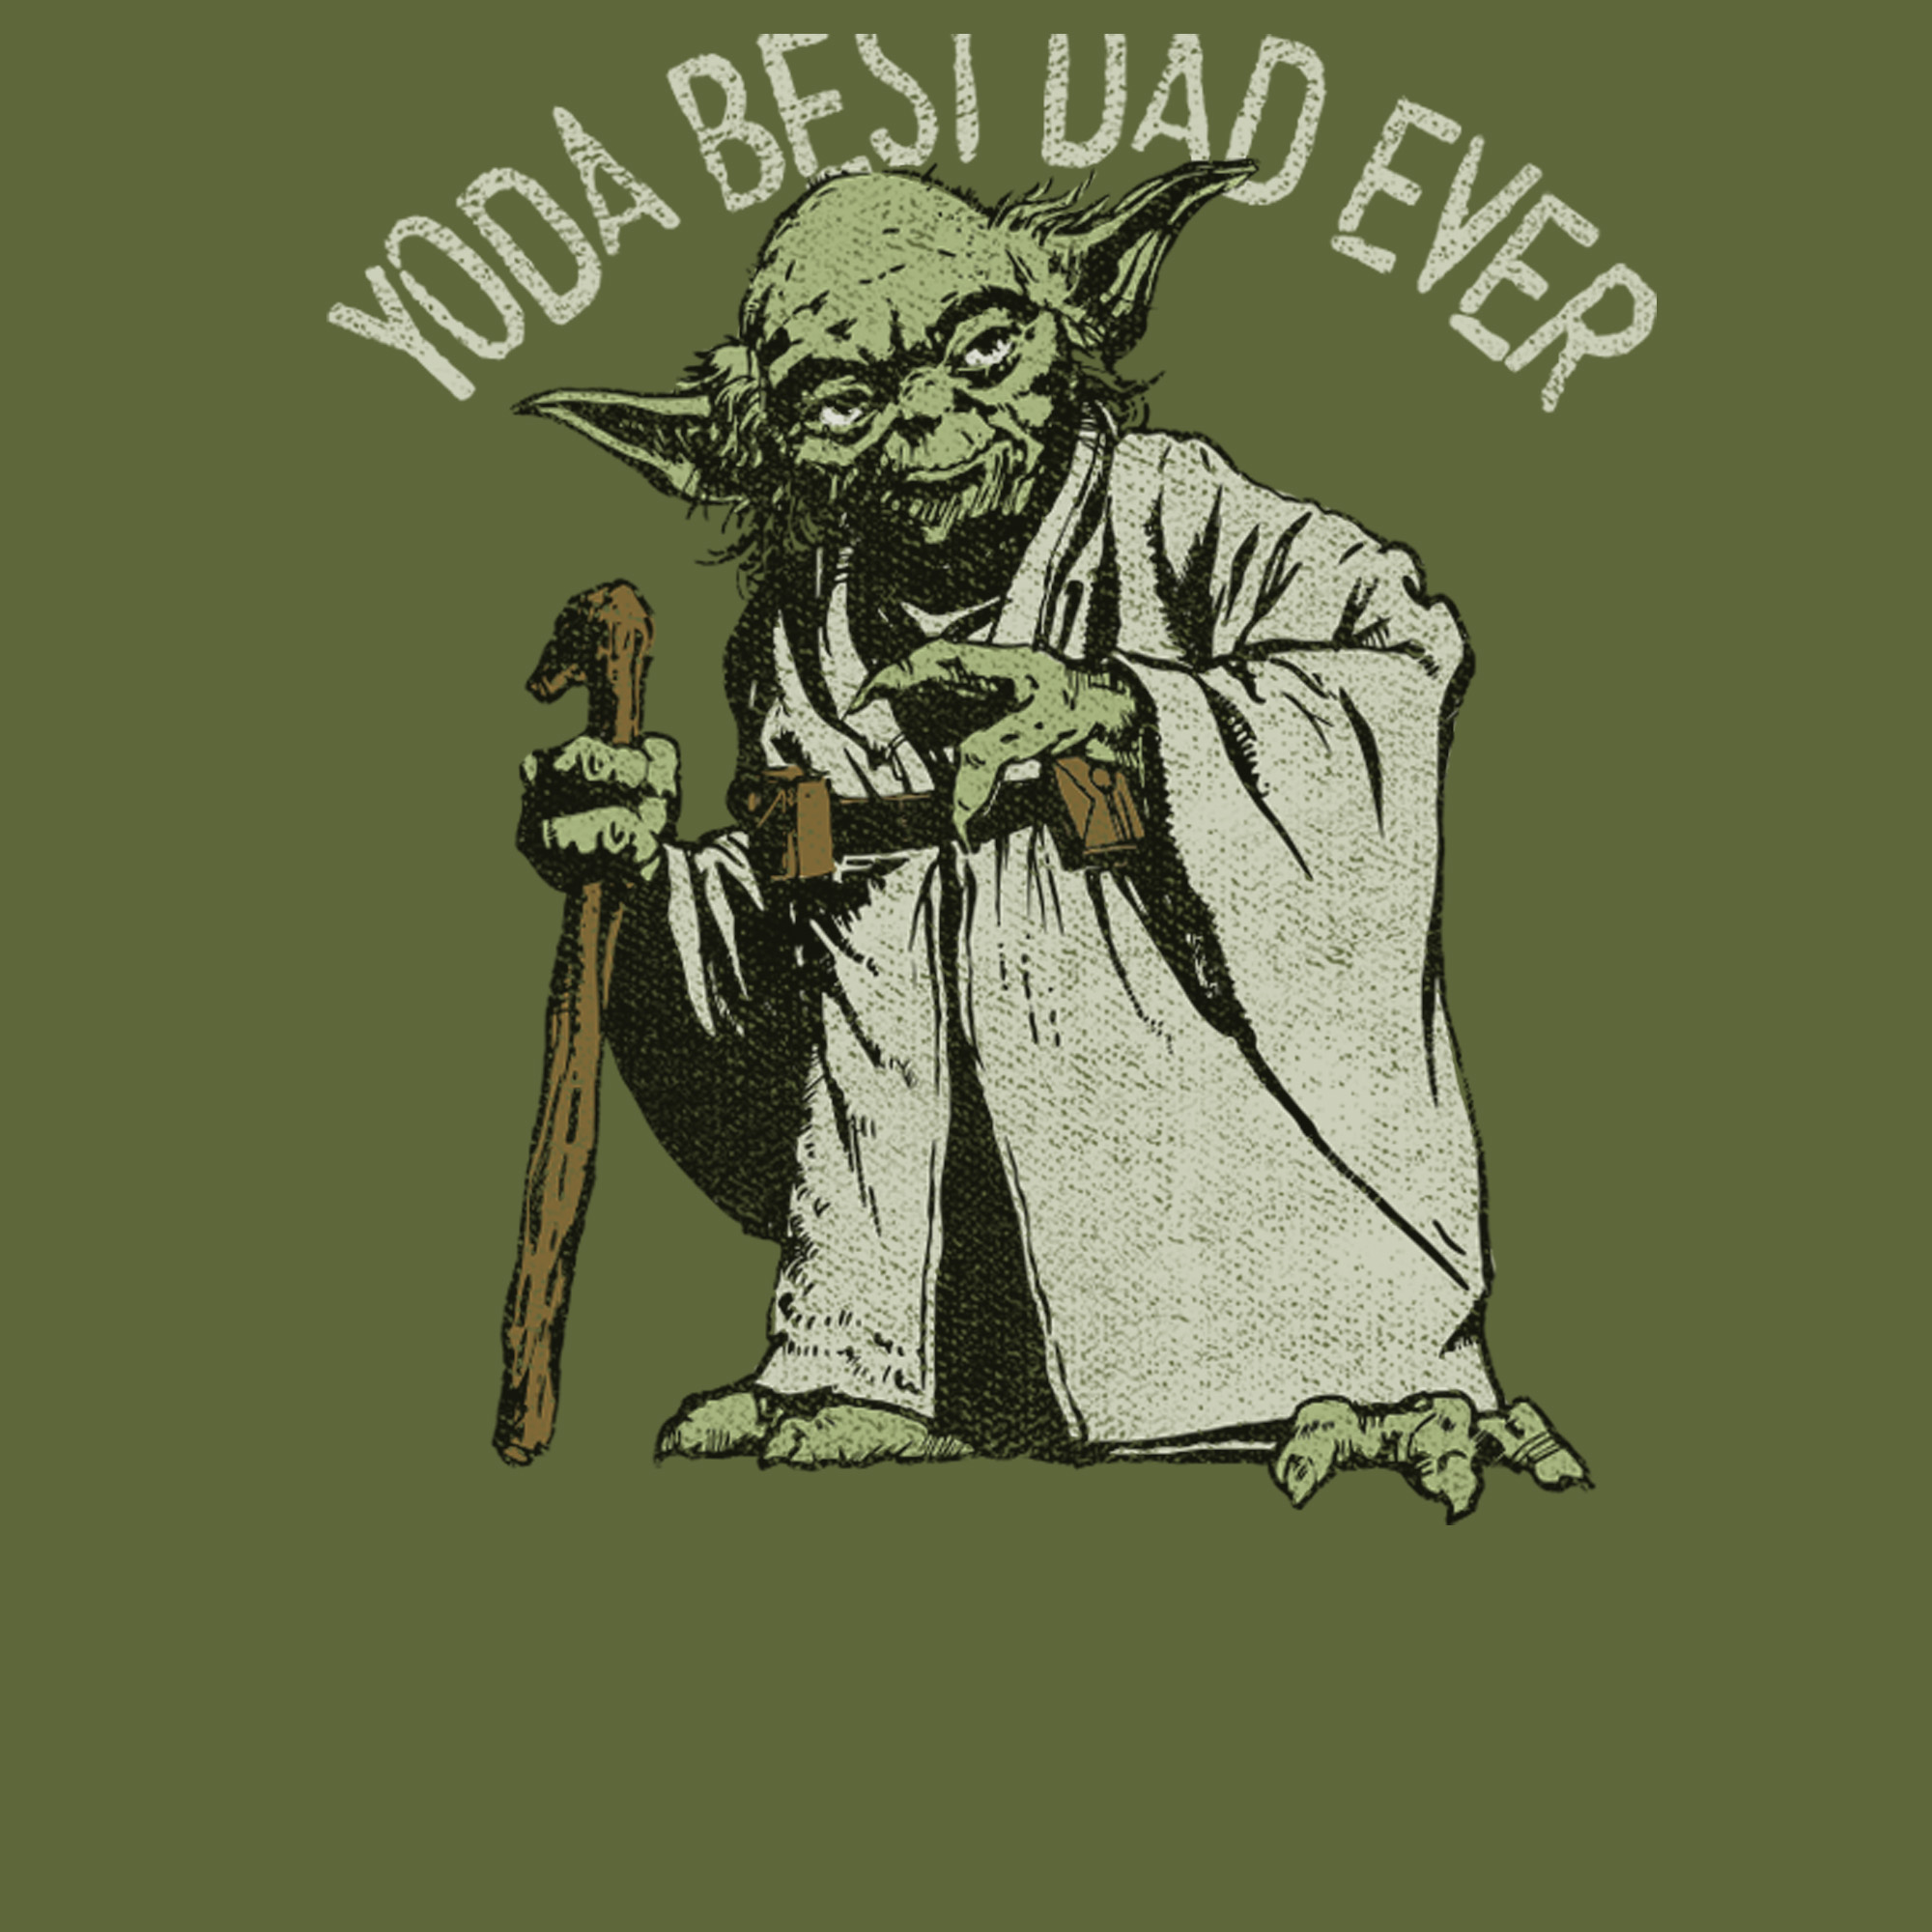 Men's Star Wars Yoda Best Dad Ever  Graphic Tee Military Green Large - image 2 of 4